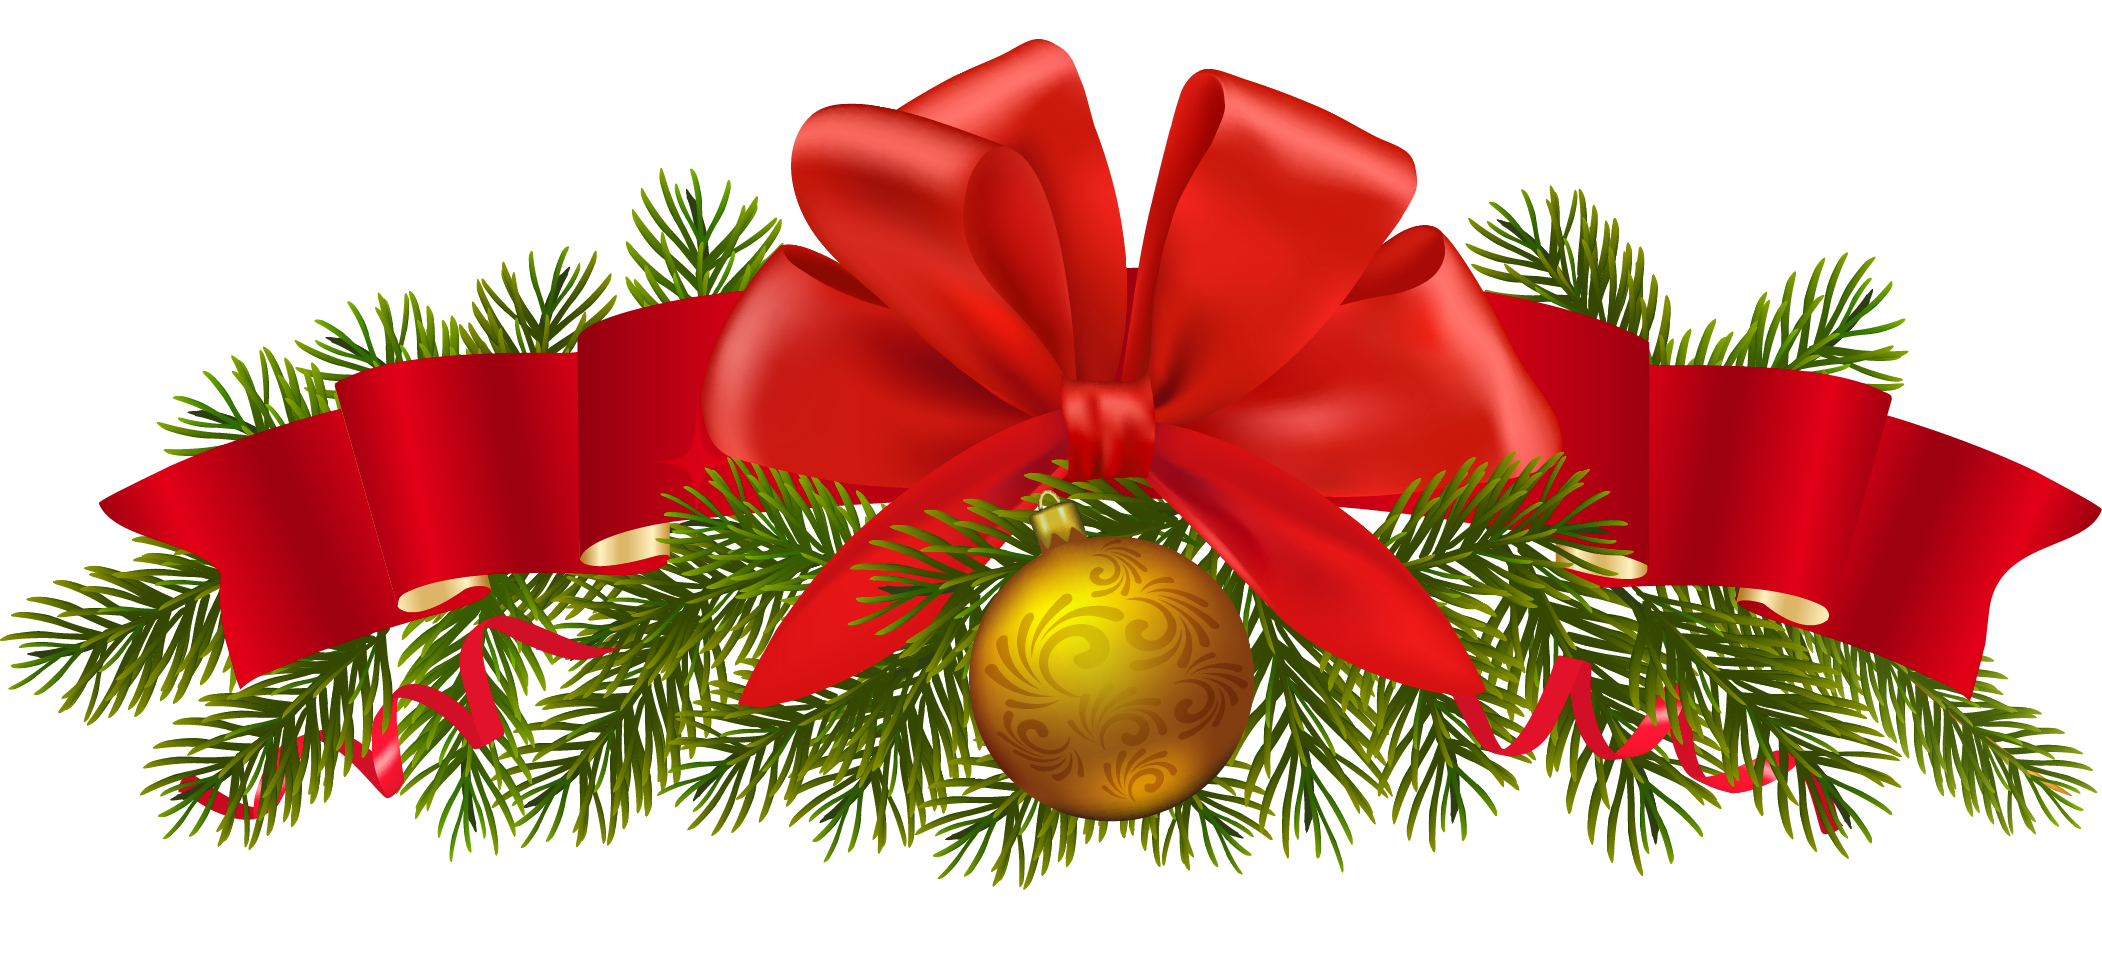 Christmas Ornaments Png Hd - Christmas, Transparent background PNG HD thumbnail